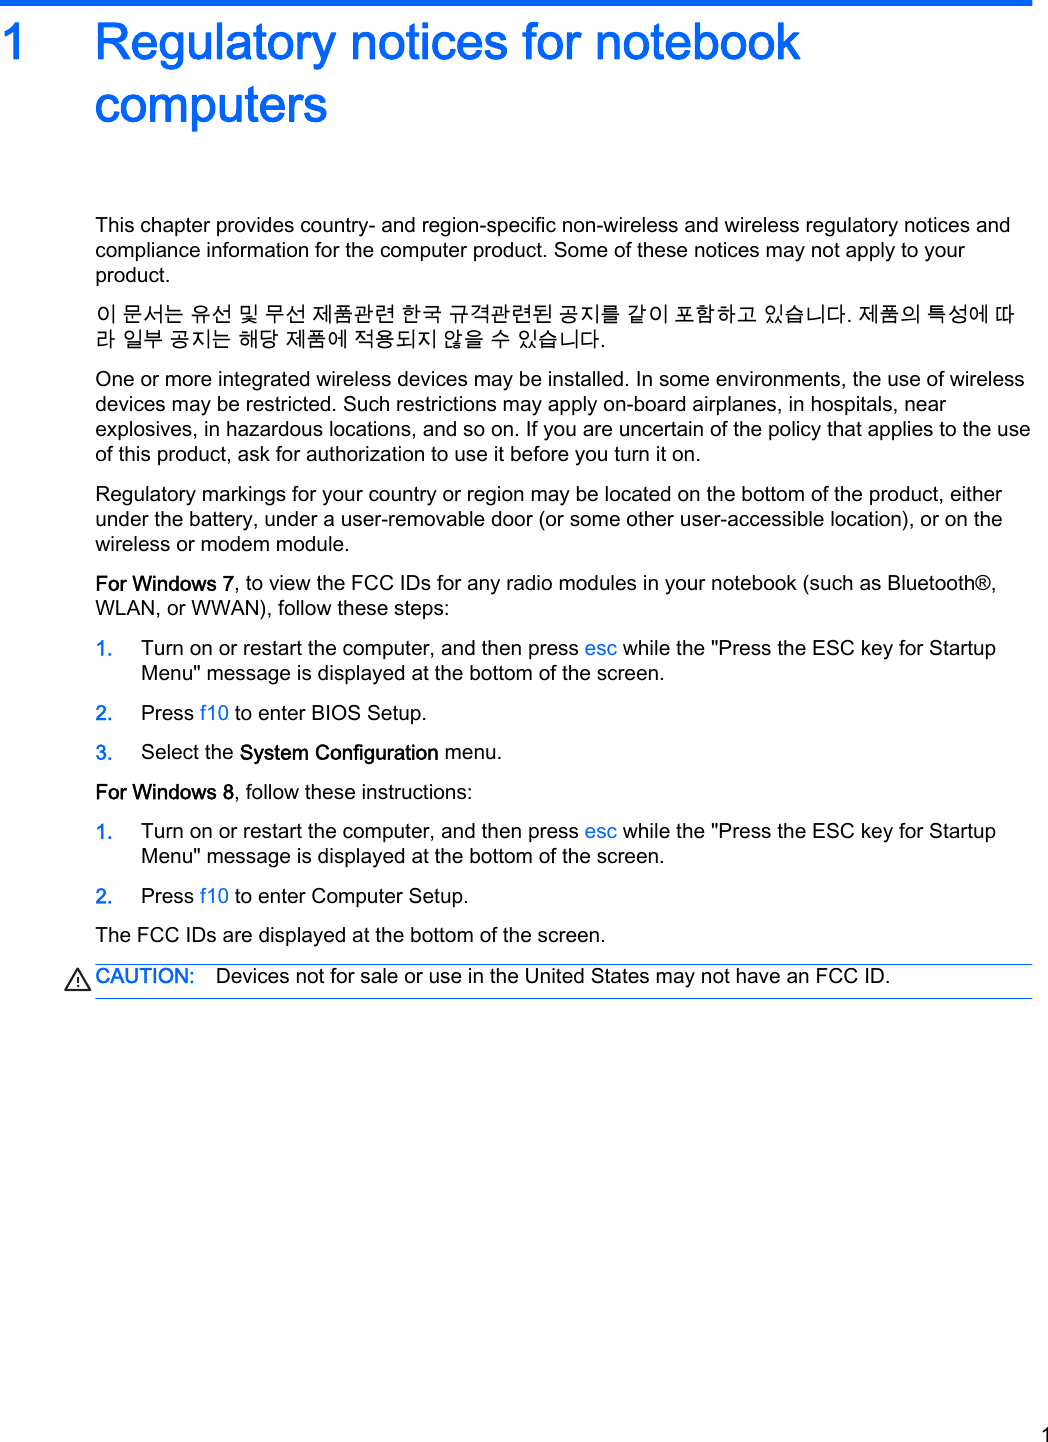 1 Regulatory notices for notebookcomputersThis chapter provides country- and region-specific non-wireless and wireless regulatory notices andcompliance information for the computer product. Some of these notices may not apply to yourproduct.이 문서는 유선 및 무선 제품관련 한국 규격관련된 공지를 같이 포함하고 있습니다. 제품의 특성에 따라 일부 공지는 해당 제품에 적용되지 않을 수 있습니다.One or more integrated wireless devices may be installed. In some environments, the use of wirelessdevices may be restricted. Such restrictions may apply on-board airplanes, in hospitals, nearexplosives, in hazardous locations, and so on. If you are uncertain of the policy that applies to the useof this product, ask for authorization to use it before you turn it on.Regulatory markings for your country or region may be located on the bottom of the product, eitherunder the battery, under a user-removable door (or some other user-accessible location), or on thewireless or modem module.For Windows 7, to view the FCC IDs for any radio modules in your notebook (such as Bluetooth®,WLAN, or WWAN), follow these steps:1. Turn on or restart the computer, and then press esc while the &quot;Press the ESC key for StartupMenu&quot; message is displayed at the bottom of the screen.2. Press f10 to enter BIOS Setup.3. Select the System Configuration menu.For Windows 8, follow these instructions:1. Turn on or restart the computer, and then press esc while the &quot;Press the ESC key for StartupMenu&quot; message is displayed at the bottom of the screen.2. Press f10 to enter Computer Setup.The FCC IDs are displayed at the bottom of the screen.CAUTION: Devices not for sale or use in the United States may not have an FCC ID.1